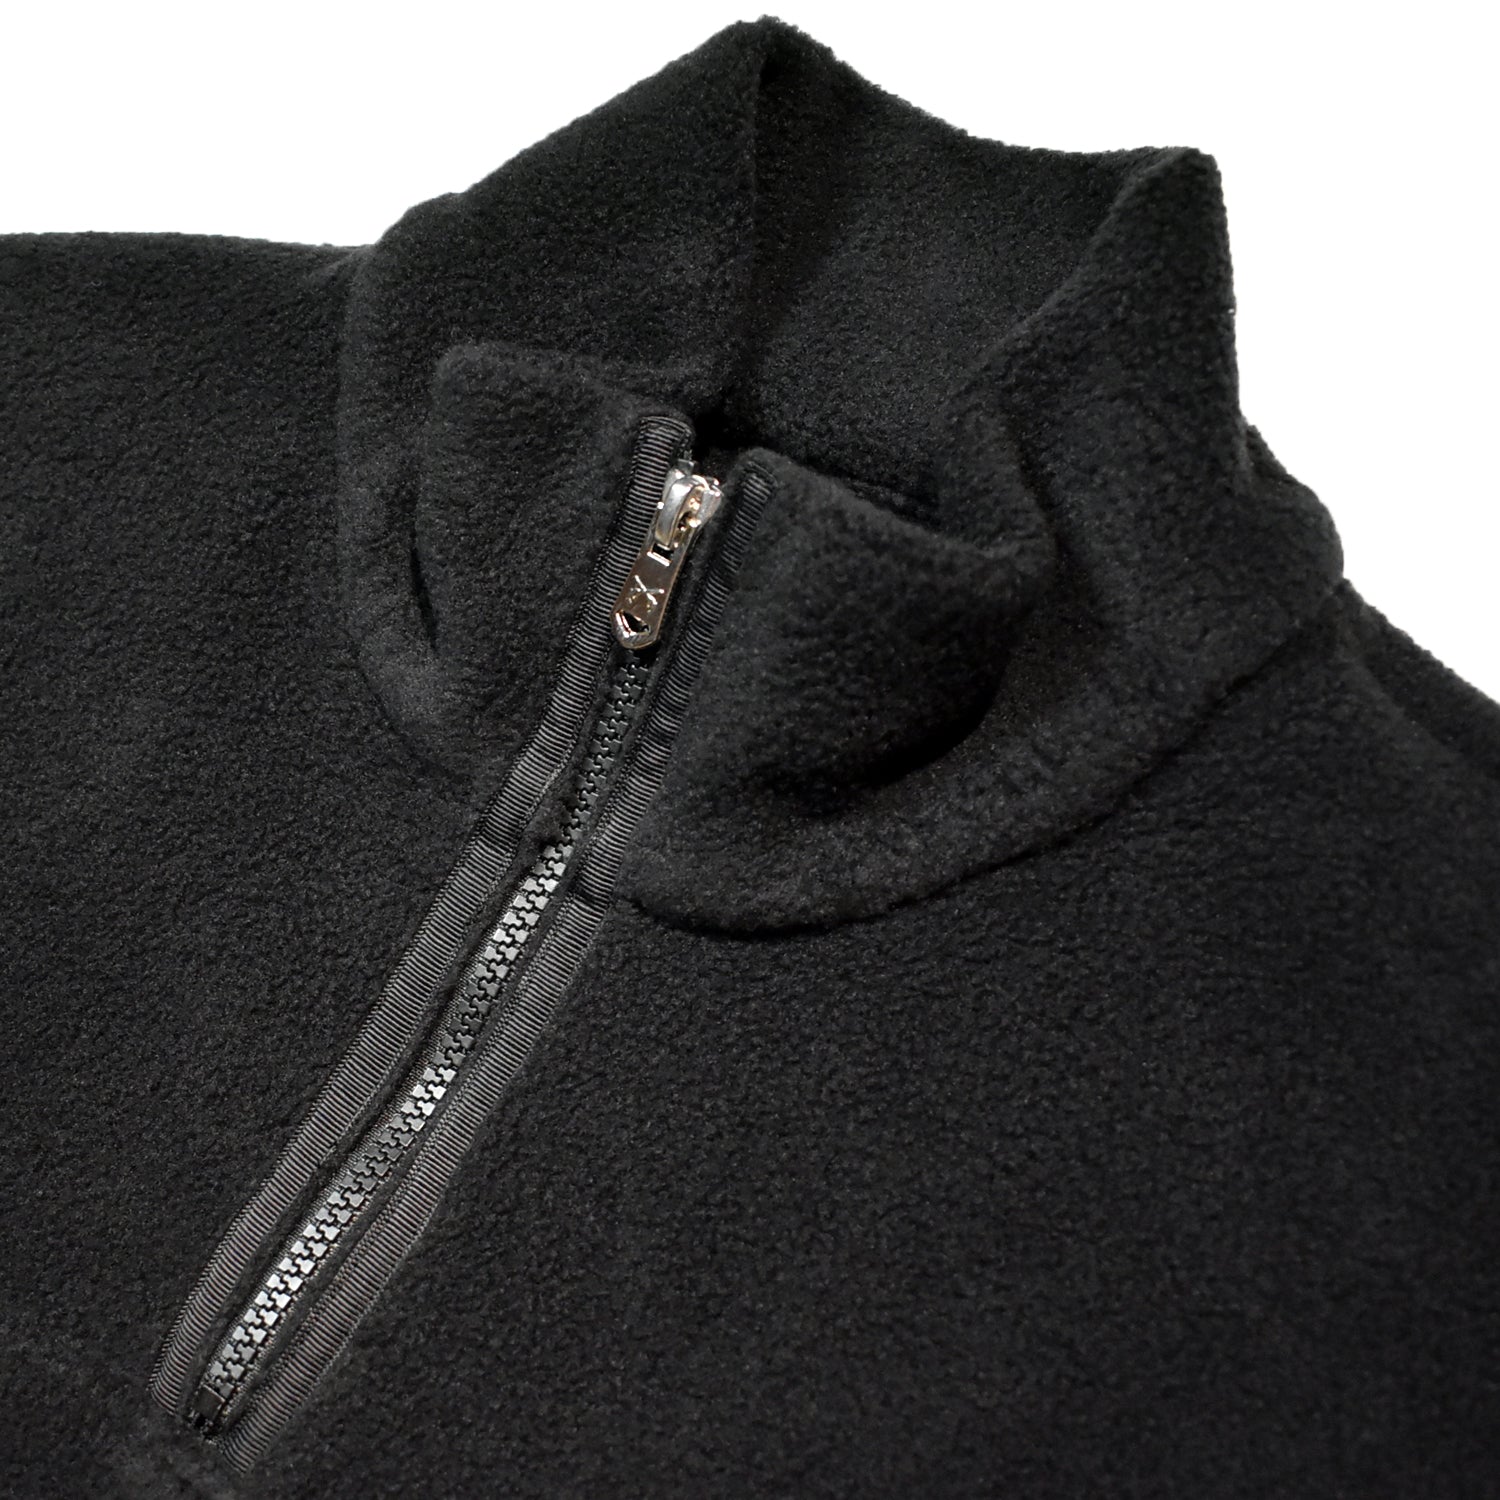 Load image into Gallery viewer, MASTERMIND WORLD FLEECE JACKET EMBROIDERY